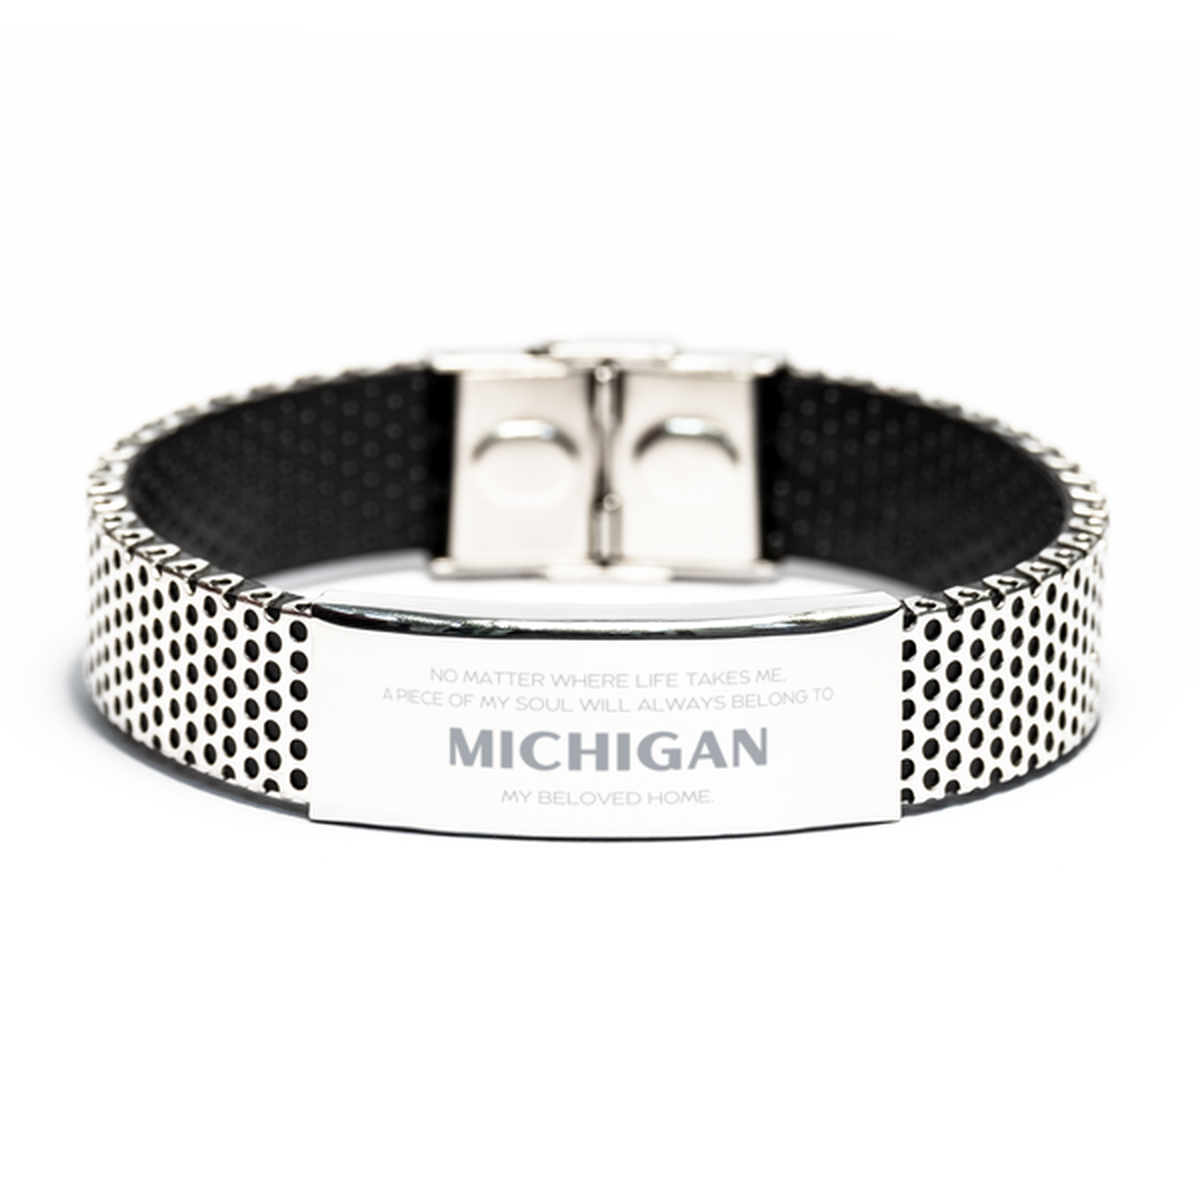 Love Michigan State Gifts, My soul will always belong to Michigan, Proud Stainless Steel Bracelet, Birthday Unique Gifts For Michigan Men, Women, Friends